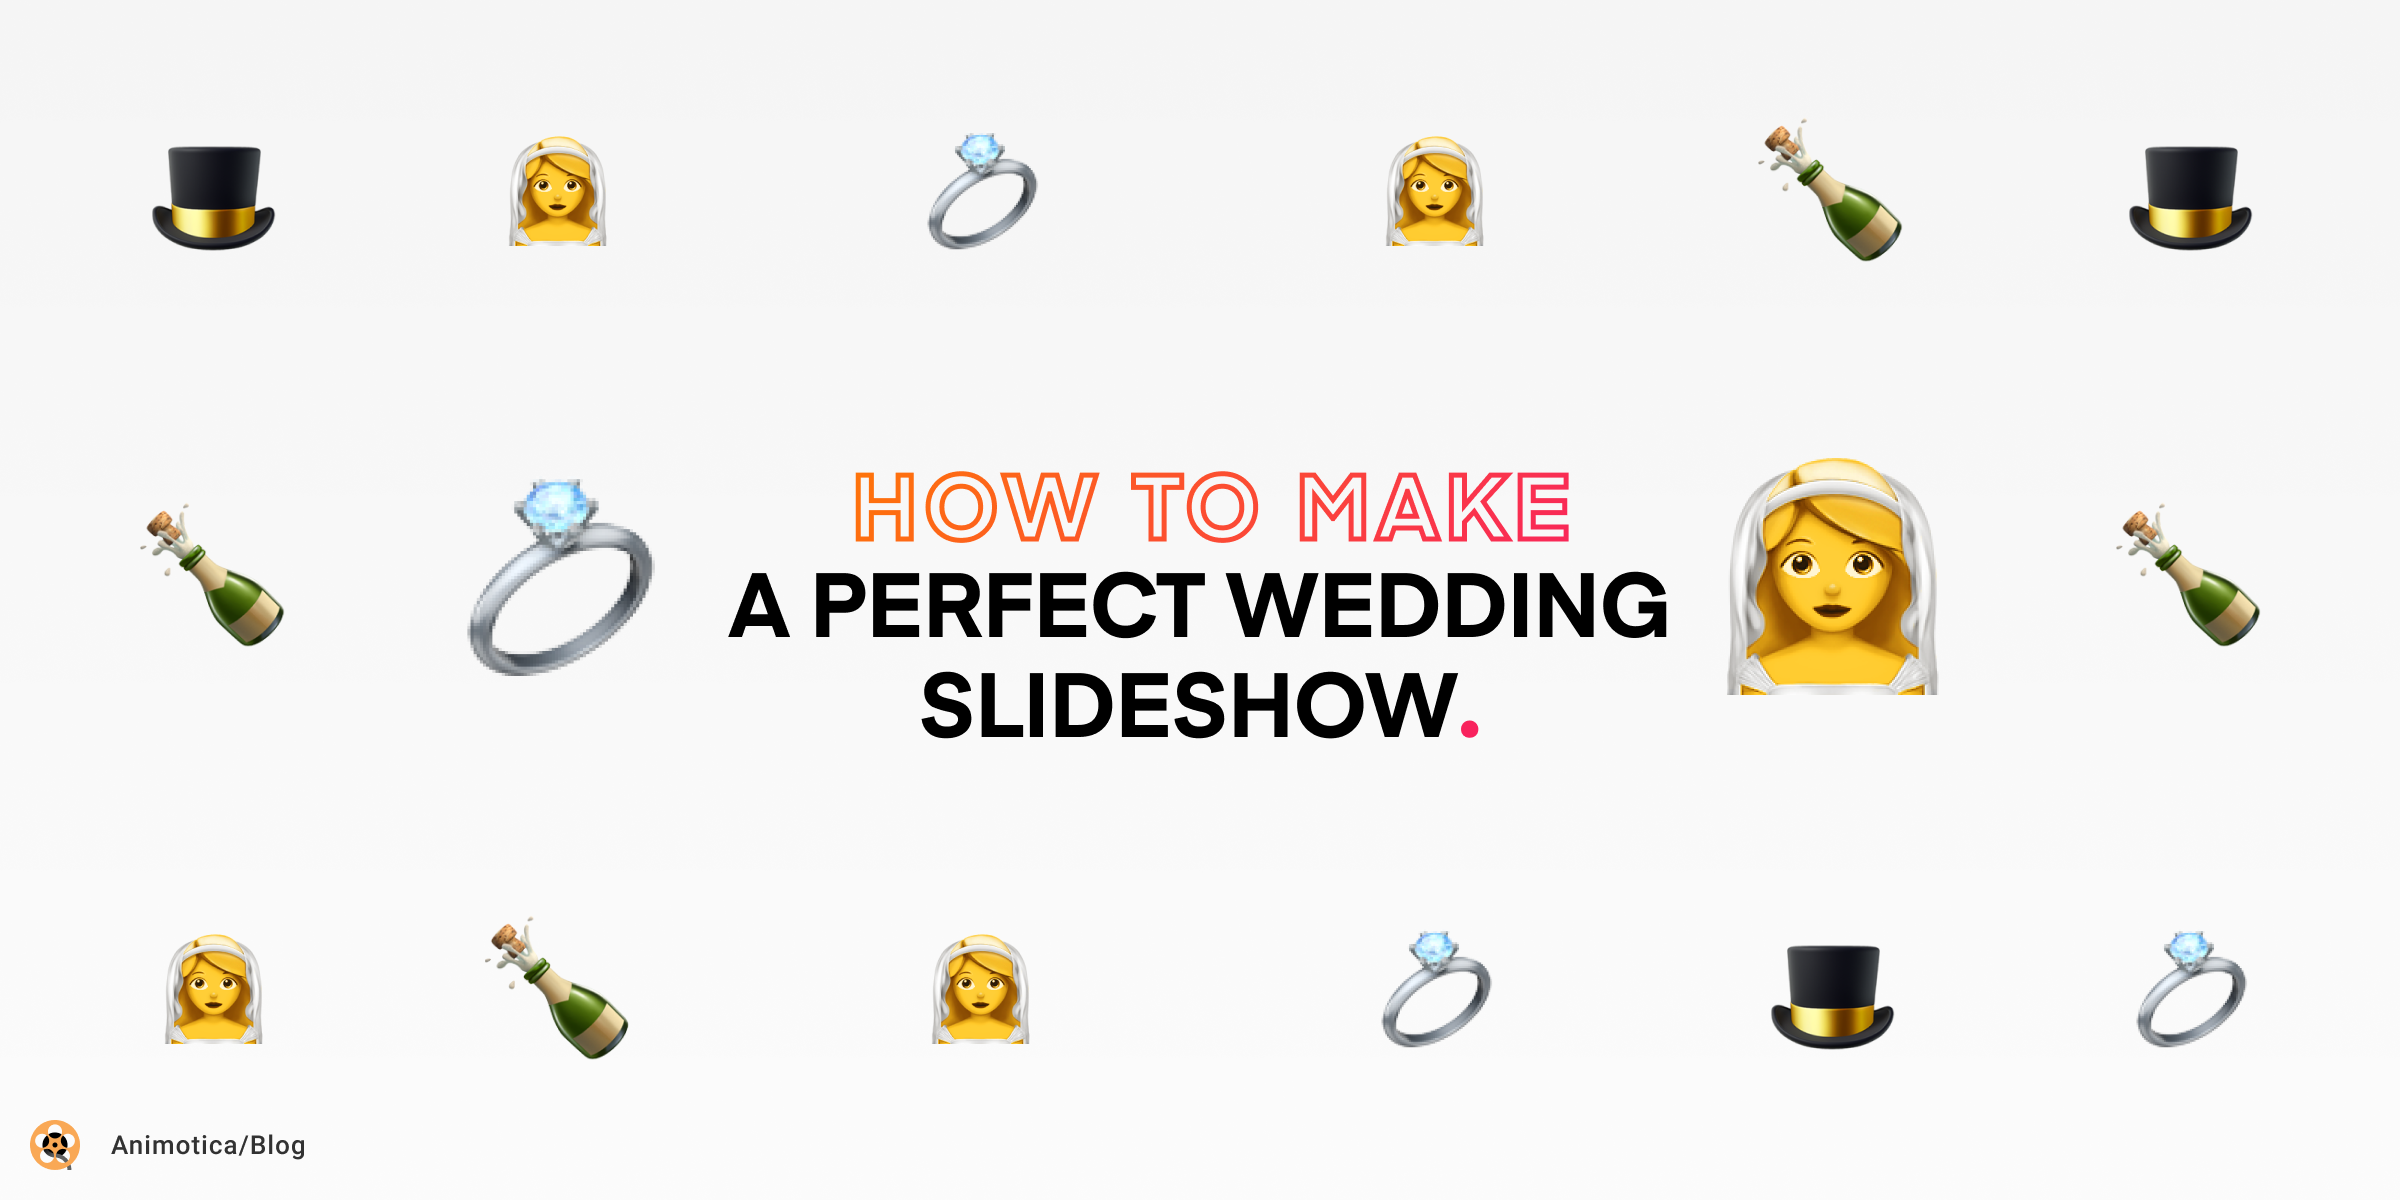 How to Make a Perfect Wedding Slideshow: Step by Step Guide